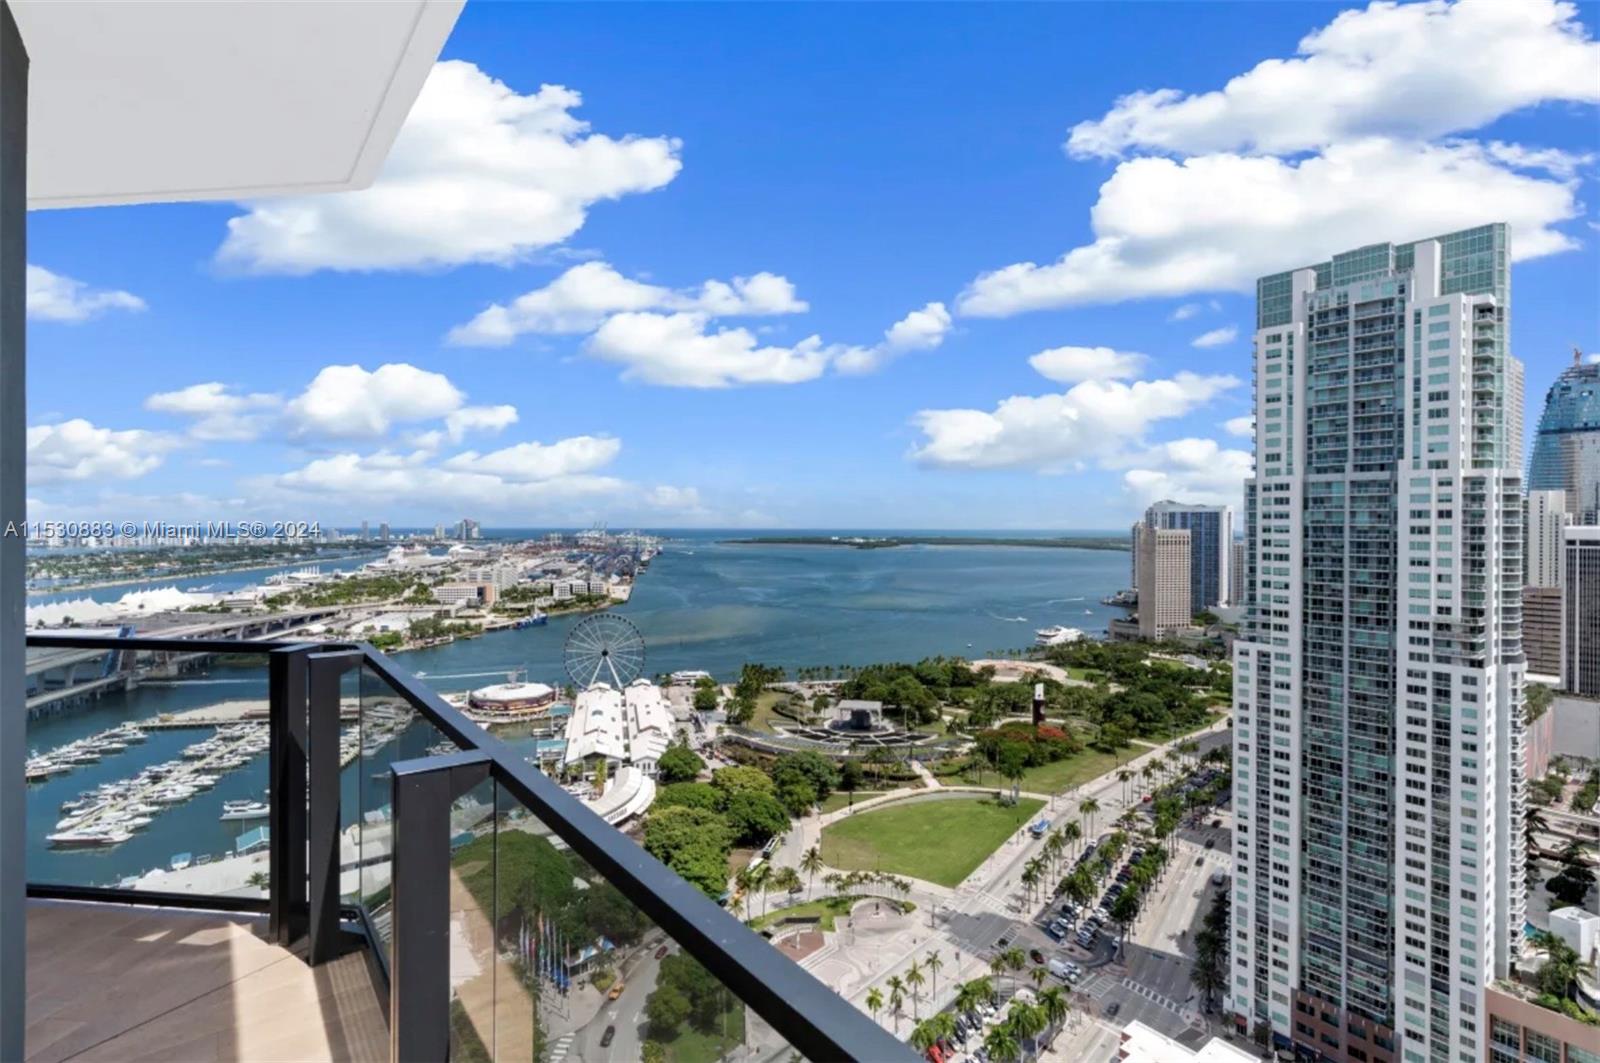 Fully furnished Studio Positioned in Miami's most magnetic locale, Downtown Miami. Enjoy
access to an abundance of well-appointed amenities and direct proximity to world class
entertainment, arts, and dining. Approved for short term rentals. On-site hospitality
management. Views of the Miami Skyline and unobstructed views of Biscayne Bay and the
Atlantic Ocean.